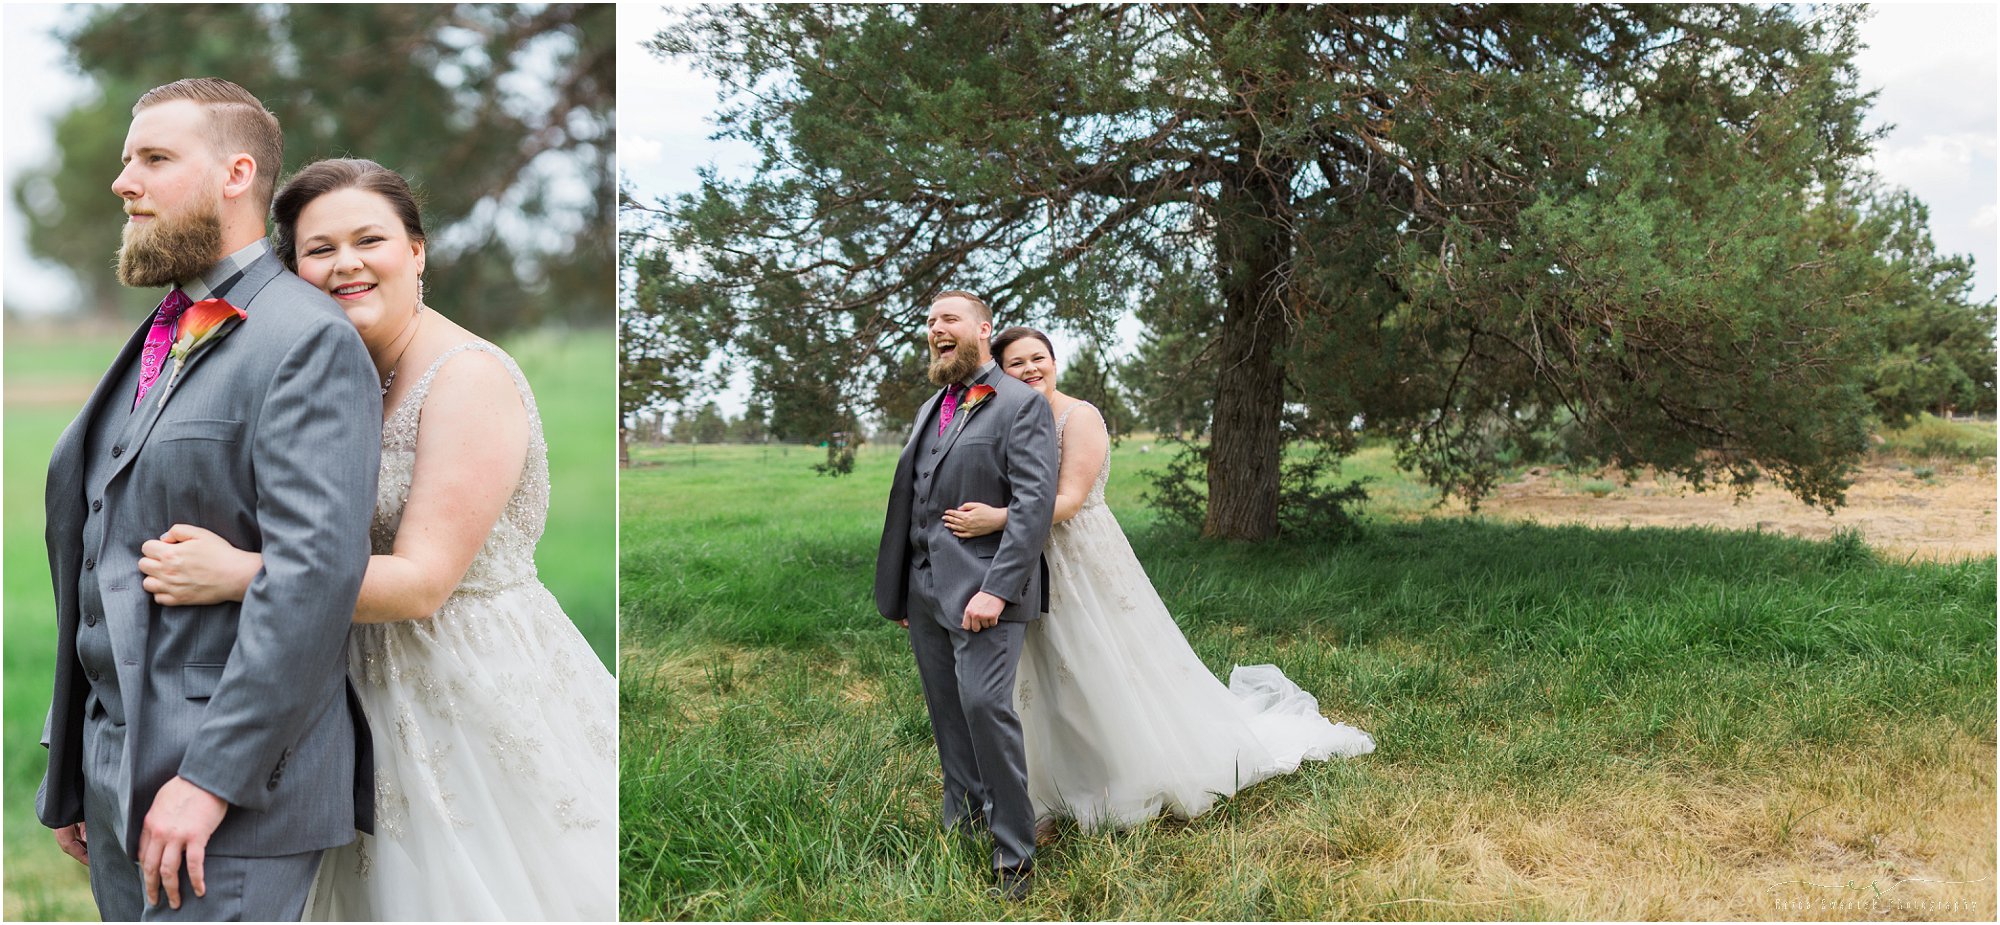 A few photos in the high desert landscape surrounding Bend before heading to the falls for their intimate Oregon waterfall wedding. | Erica Swantek Photography